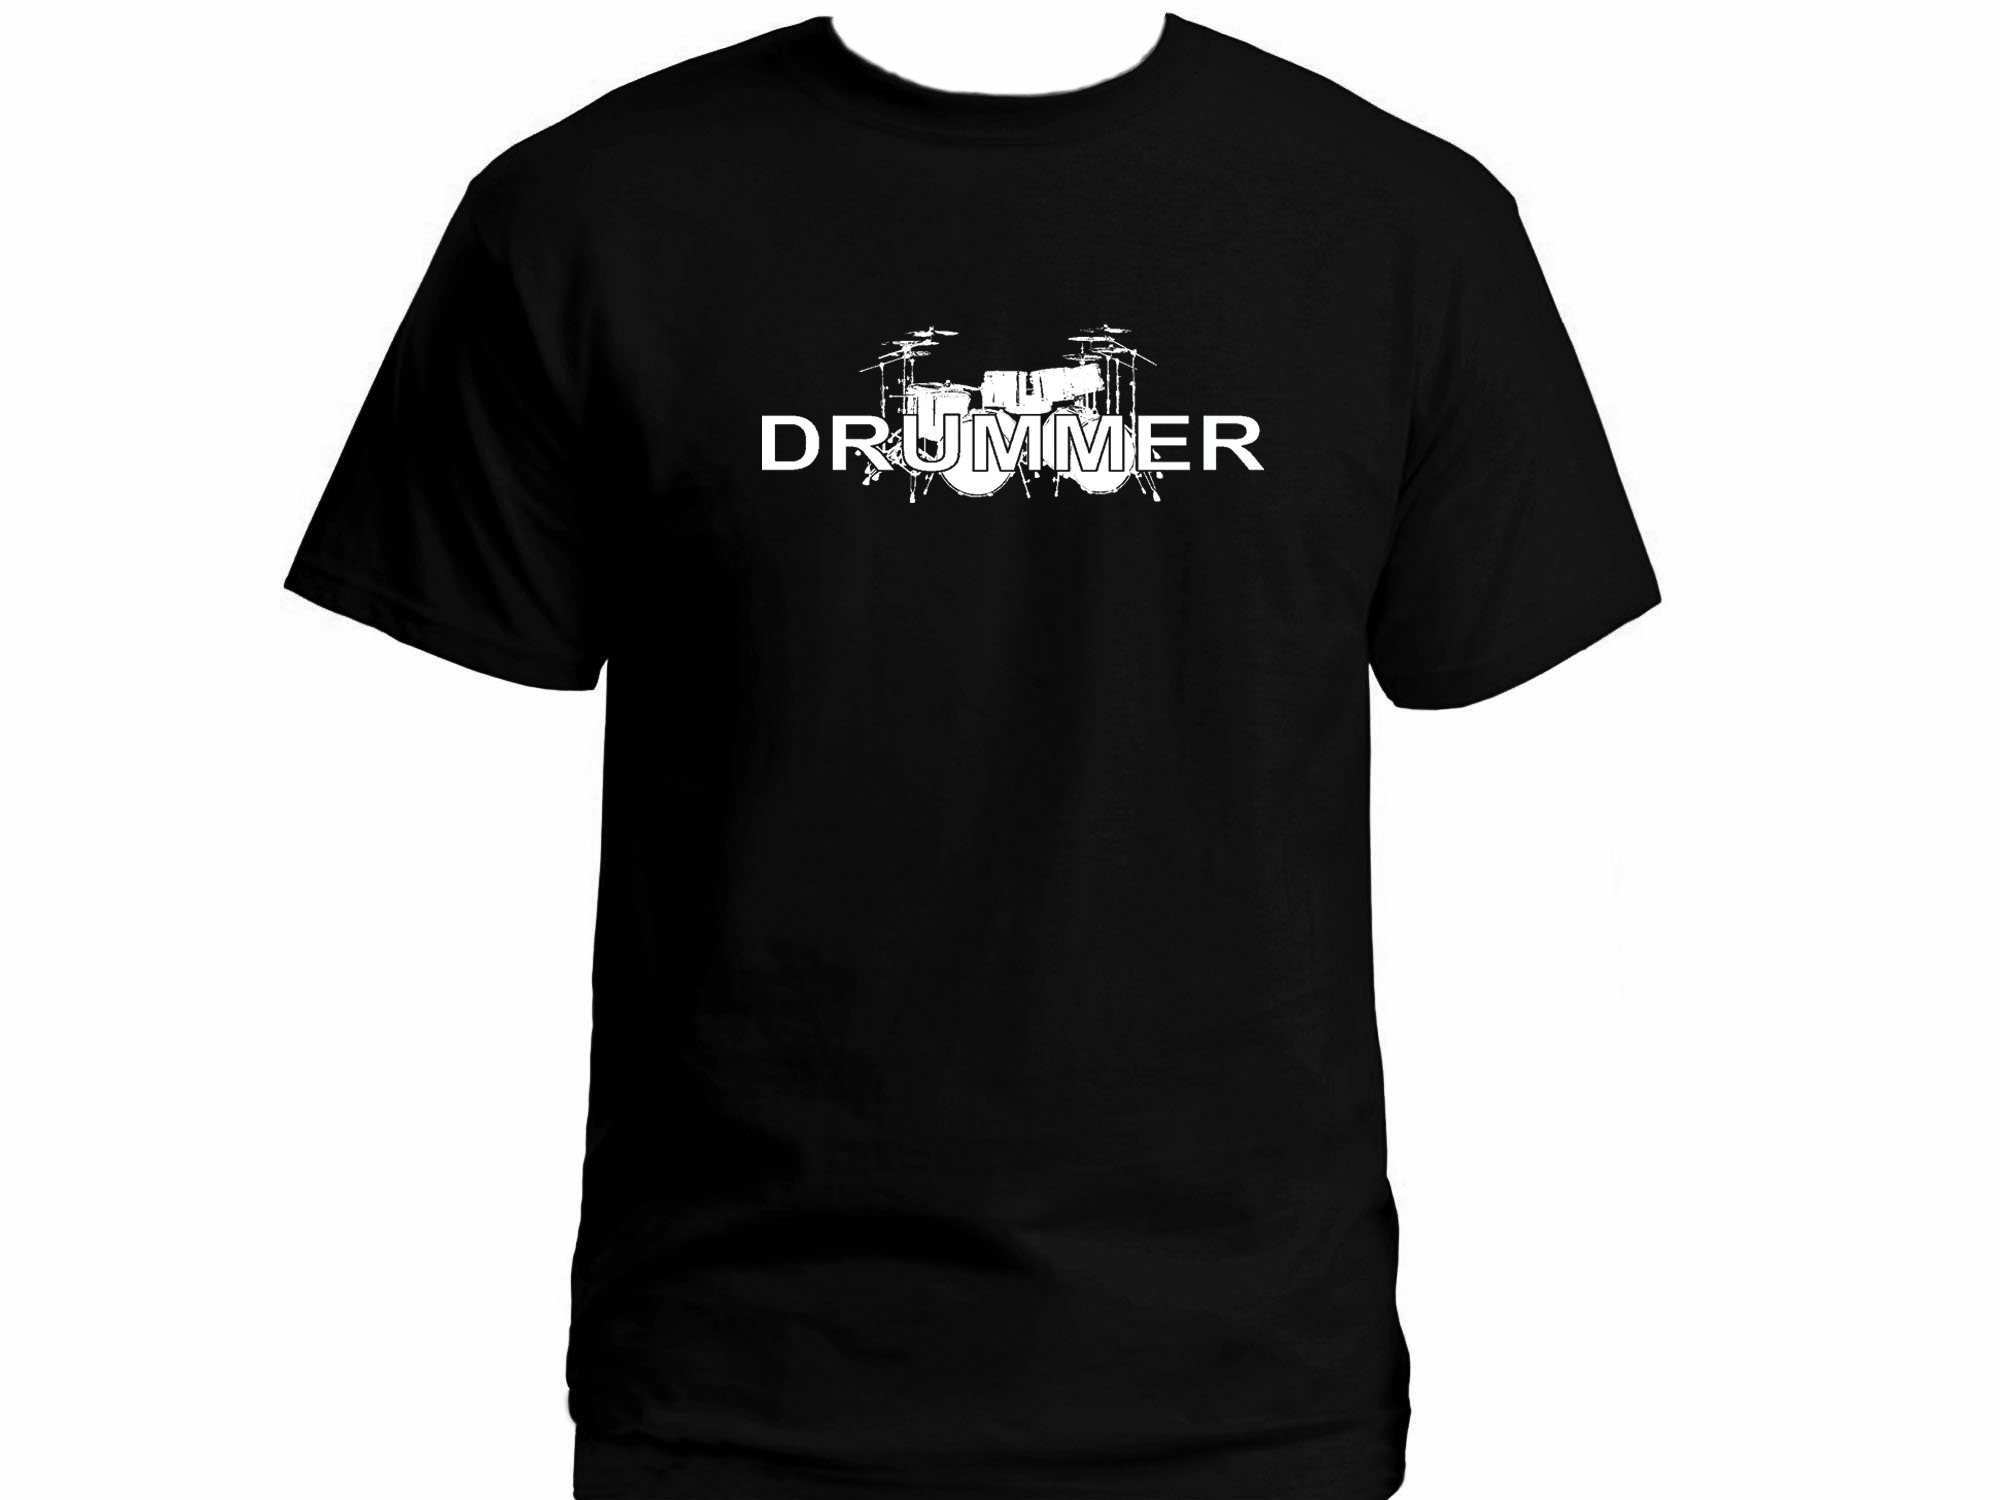 Drummer drums player t-shirt great music gift 2